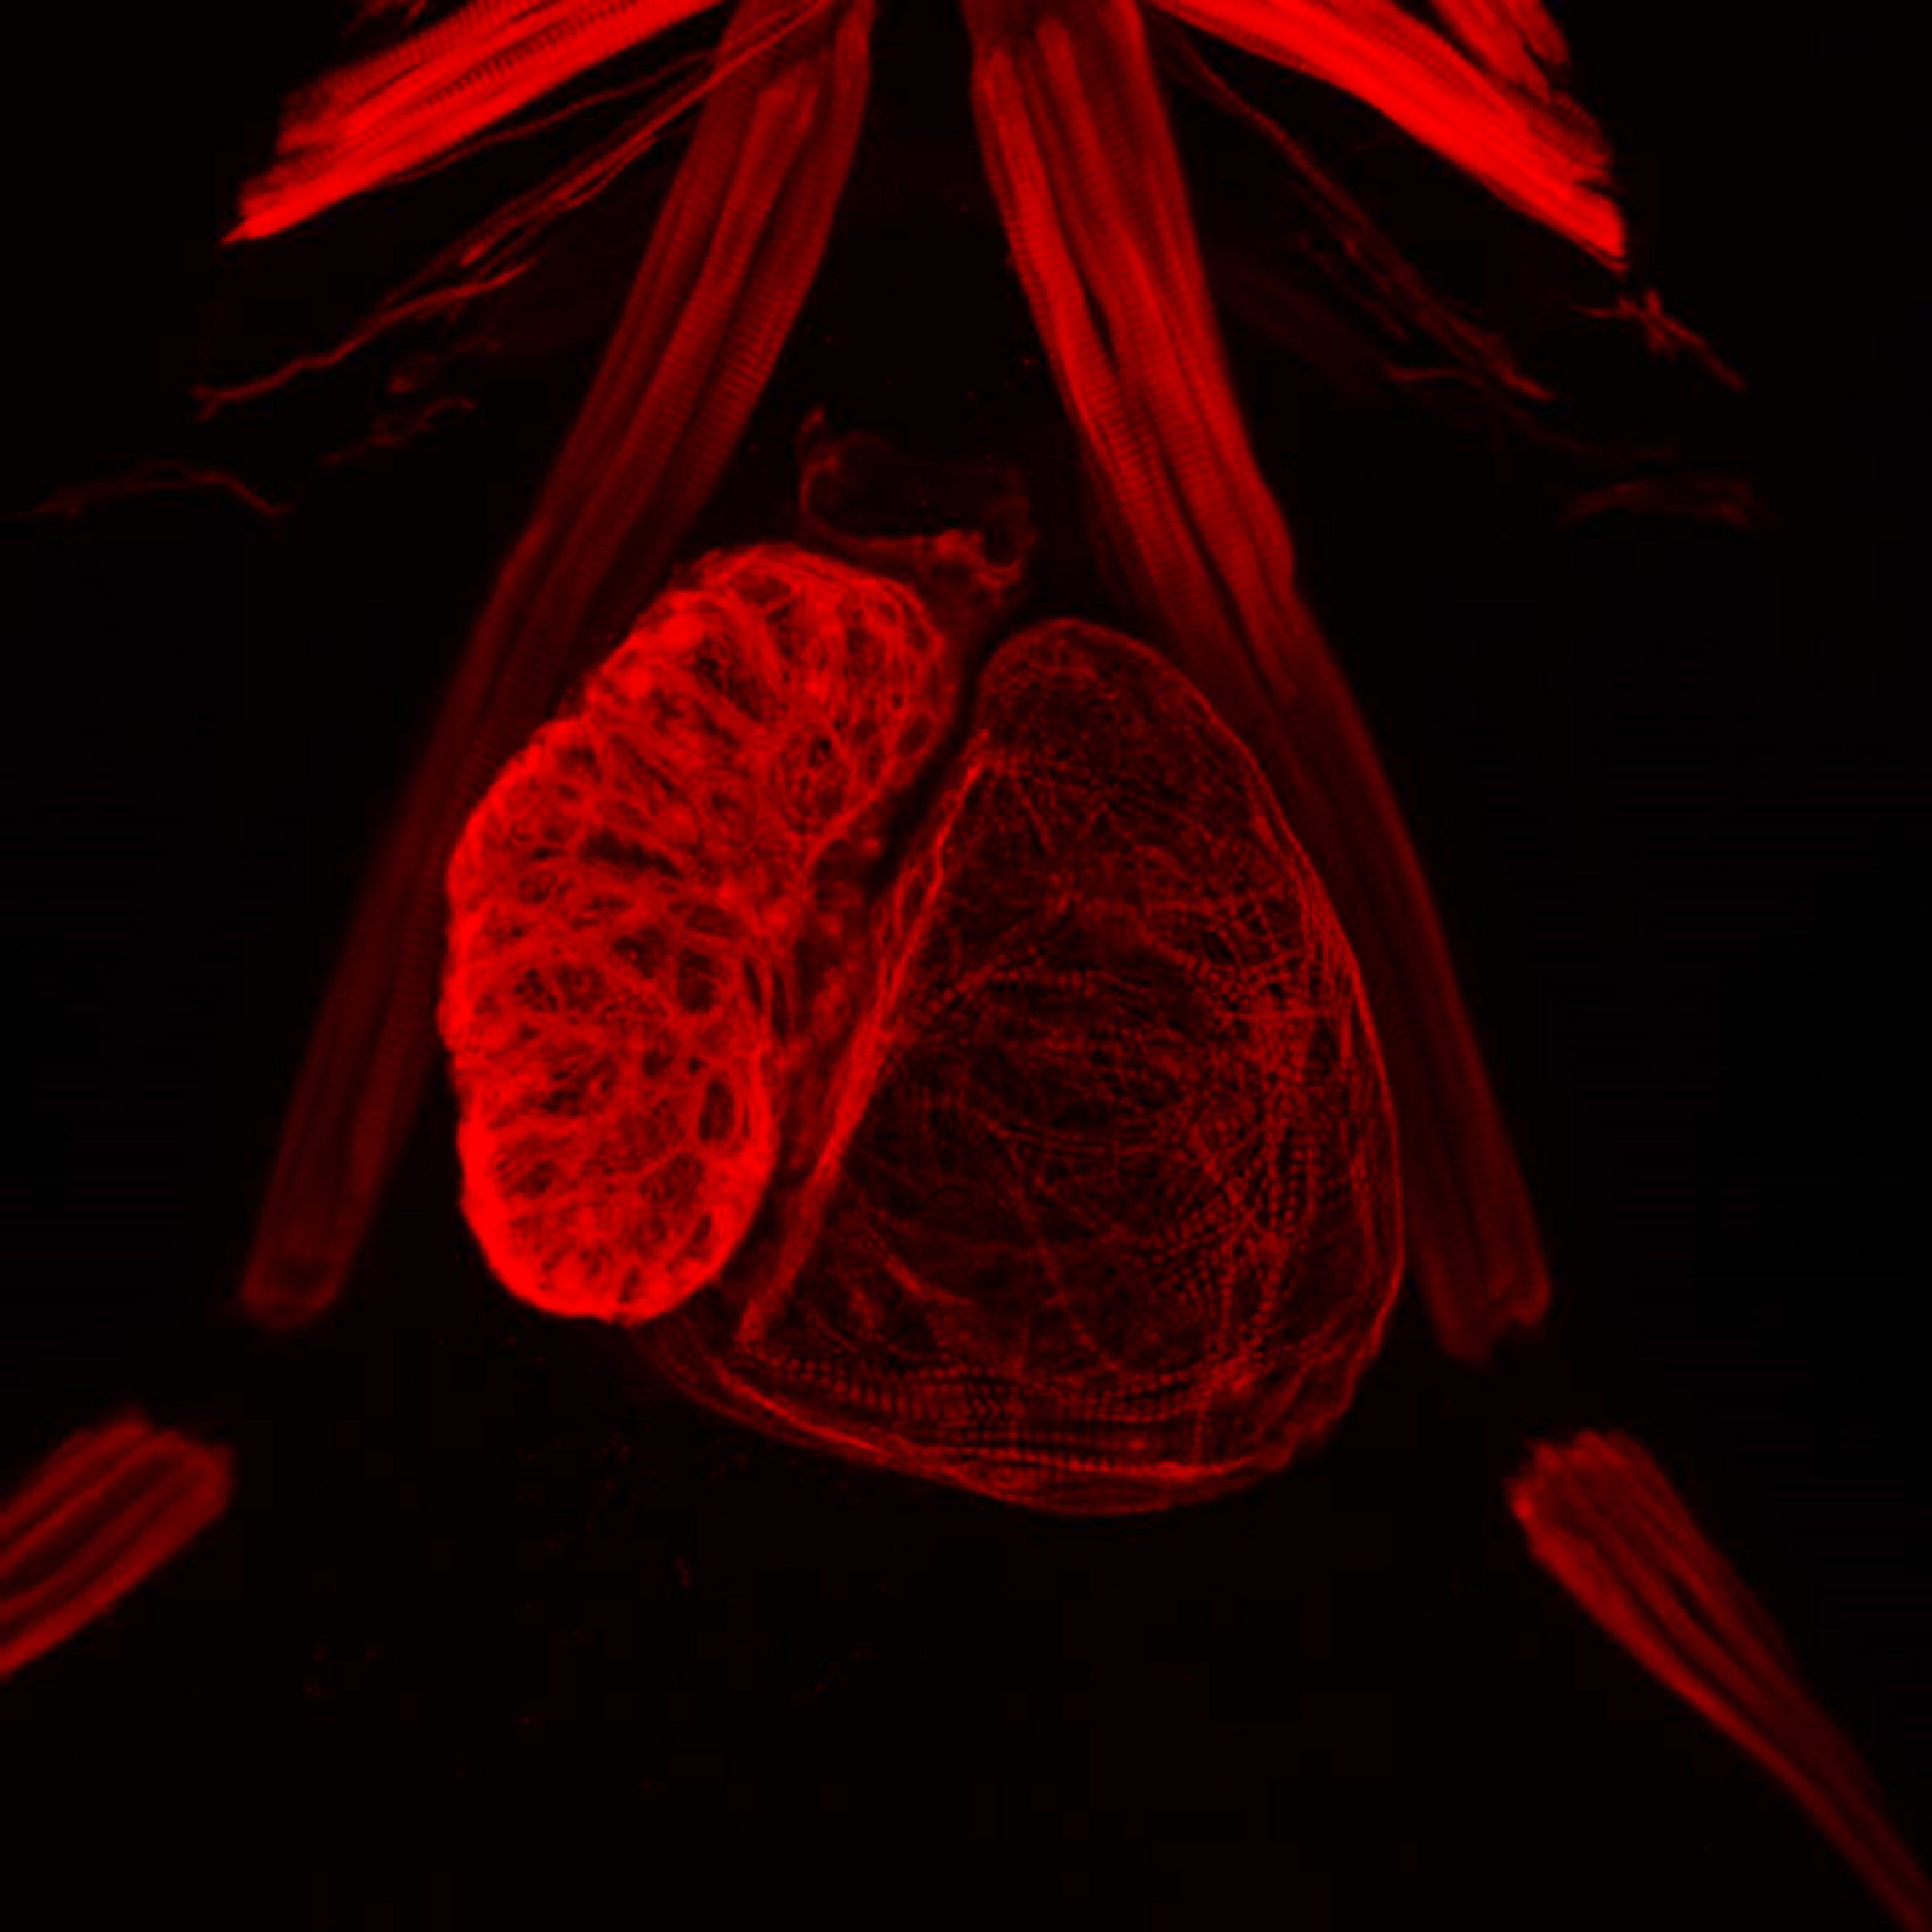 Visualization of heart muscles.